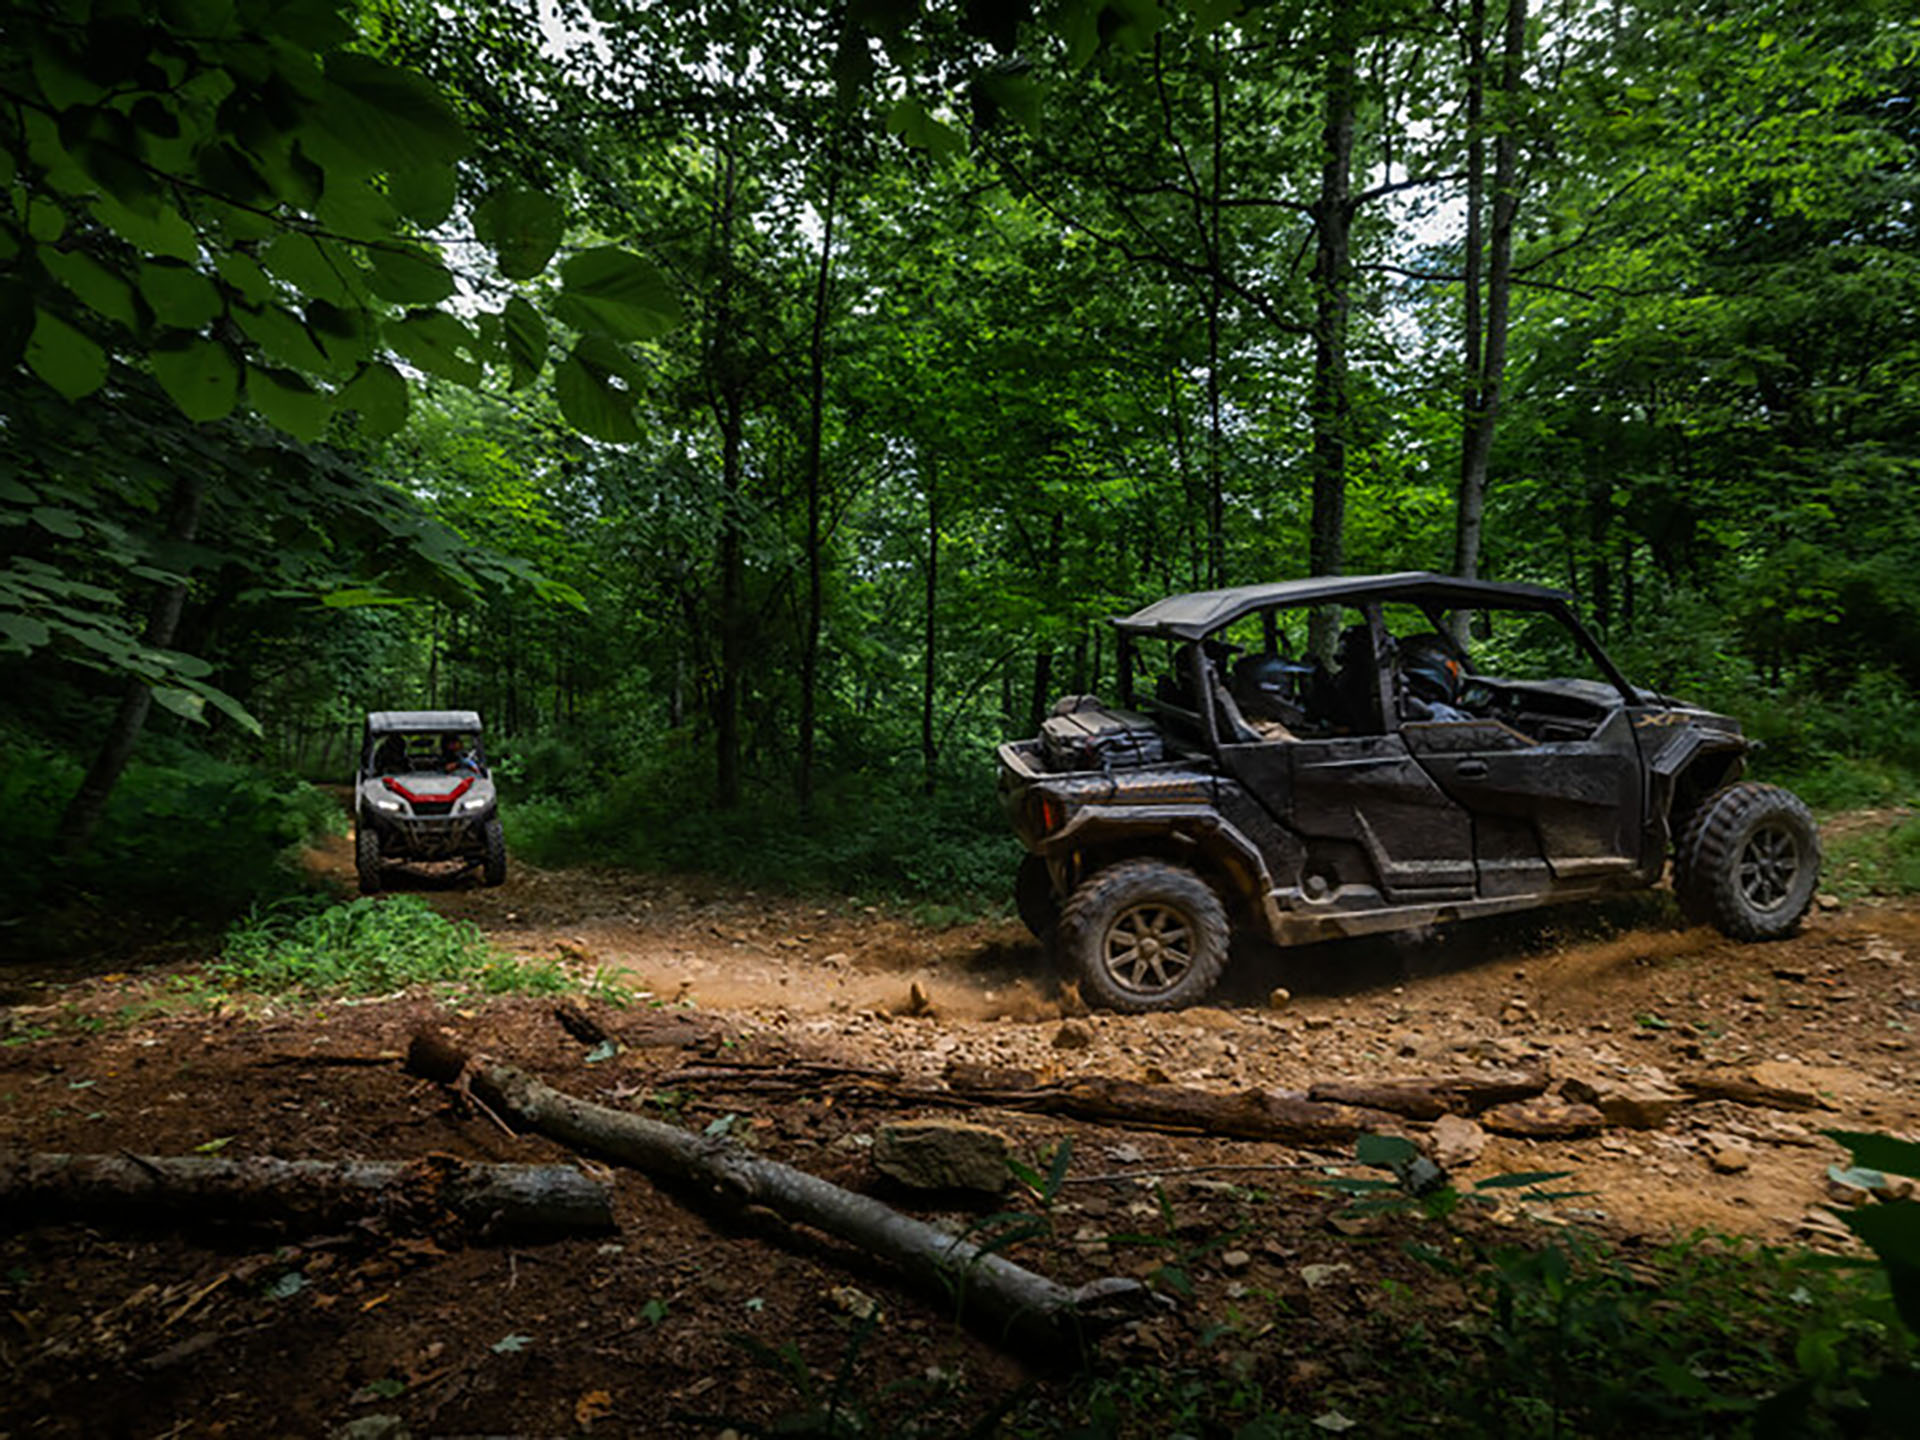 2023 Polaris General XP 4 1000 Ultimate in Ledgewood, New Jersey - Photo 10